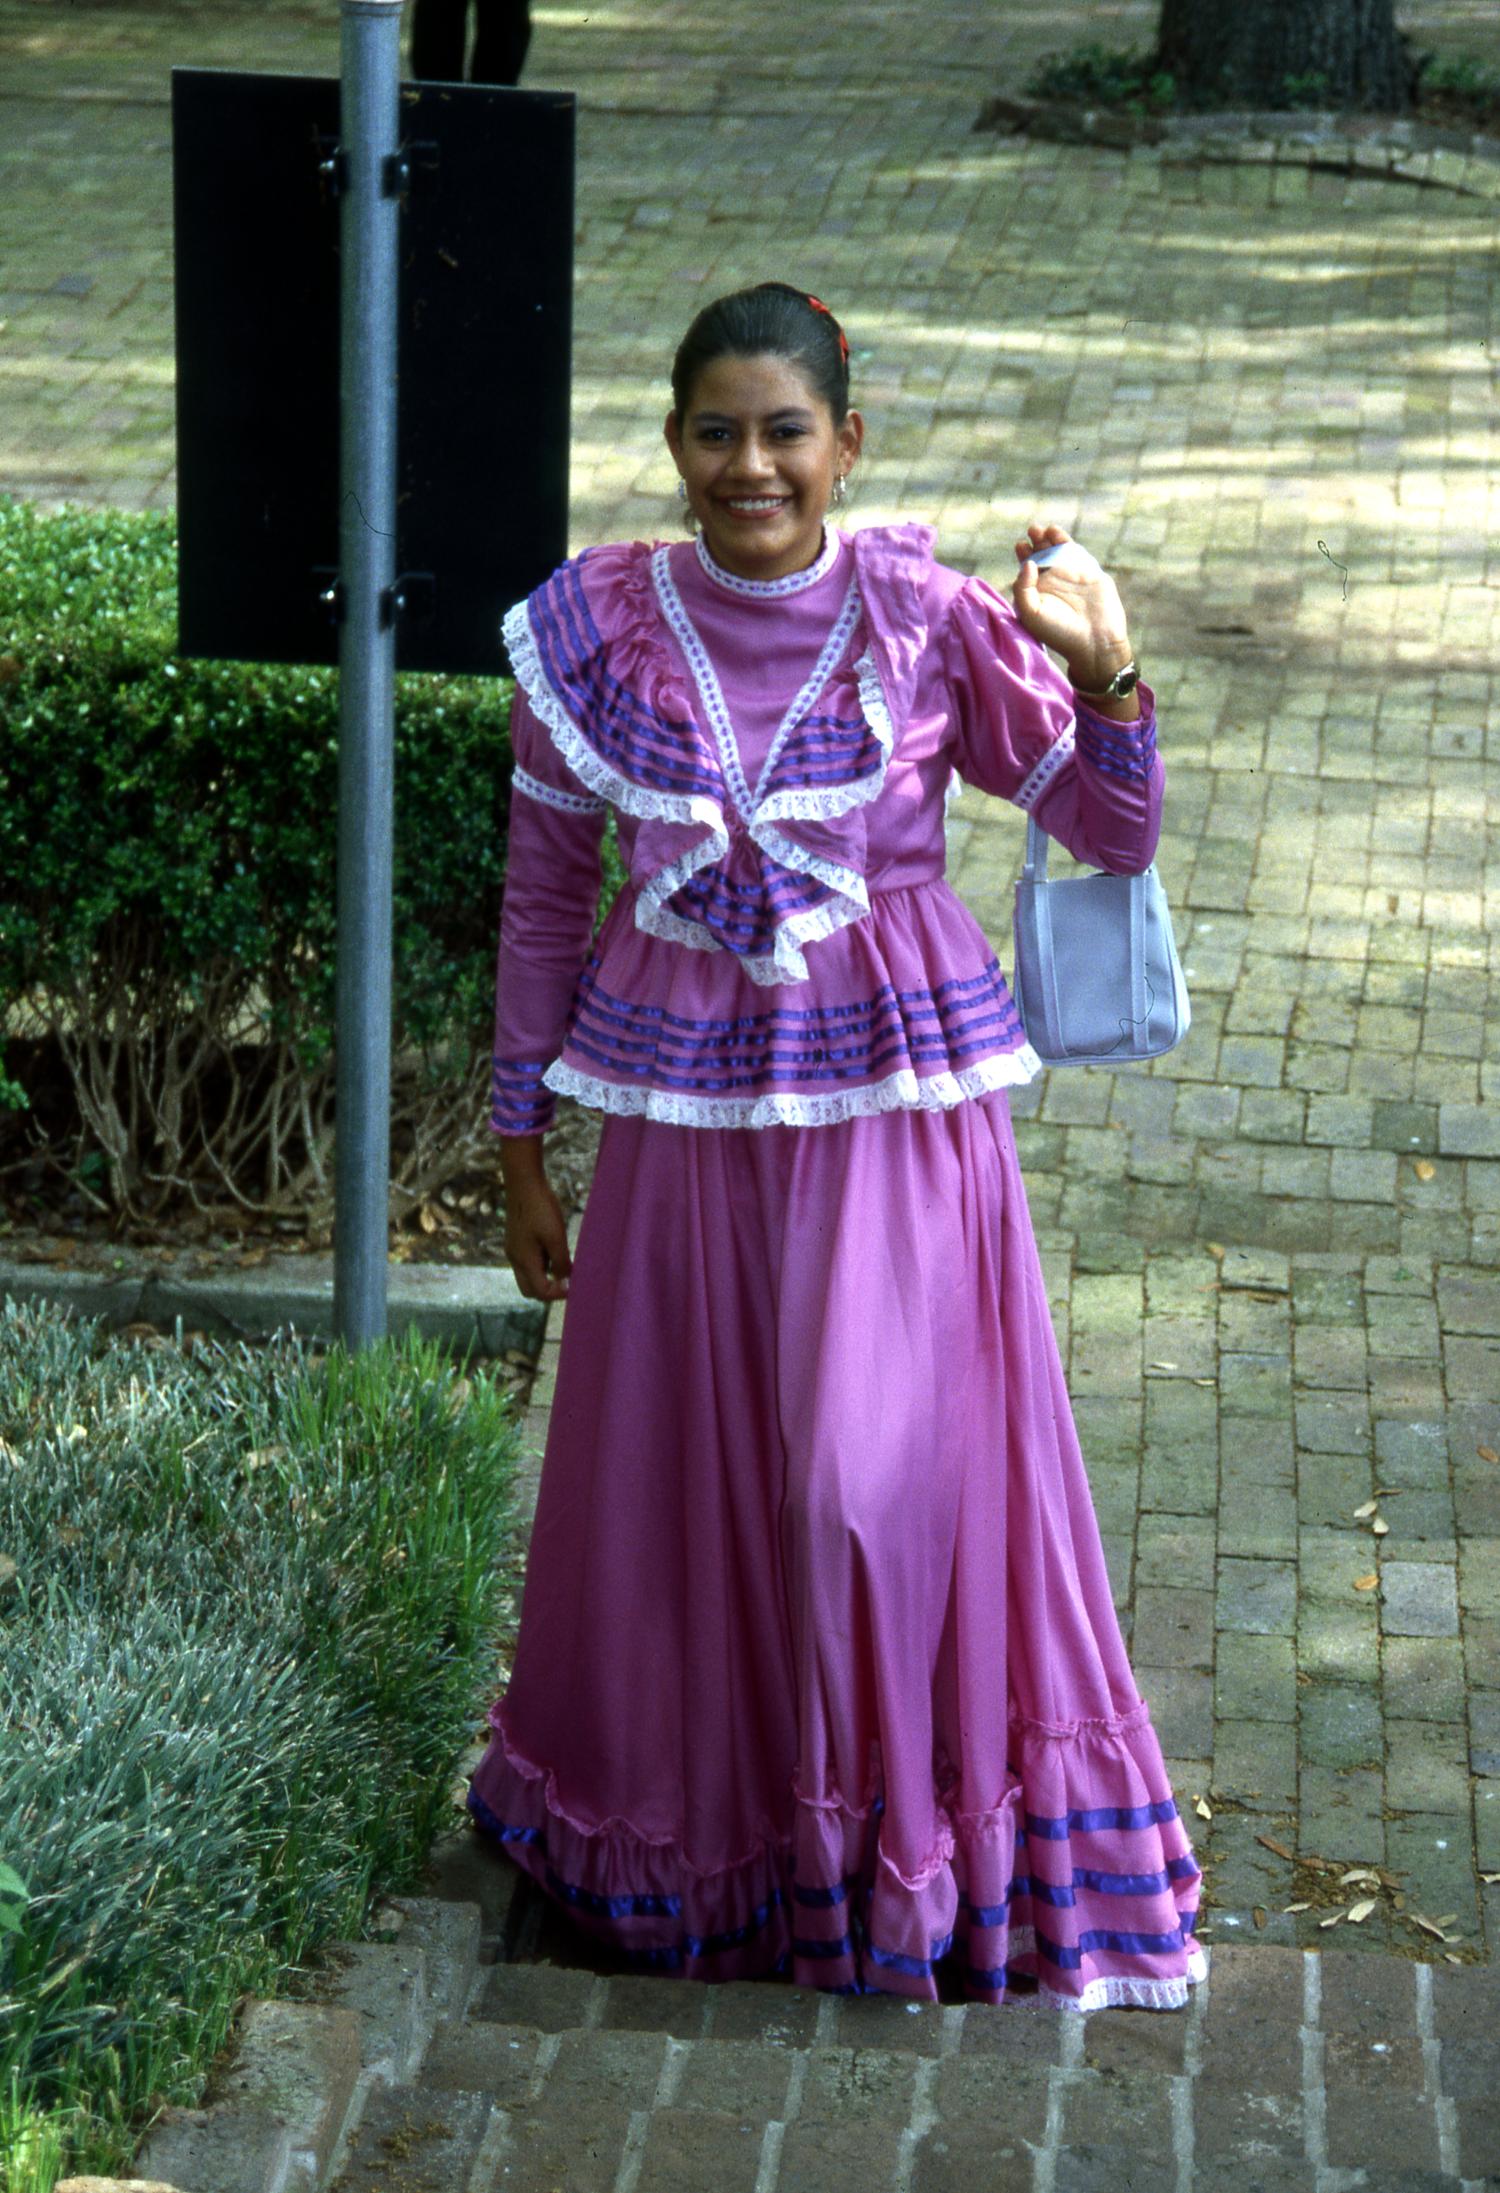 [Unidentified woman in traditional Mexican dress] - The Portal to Texas